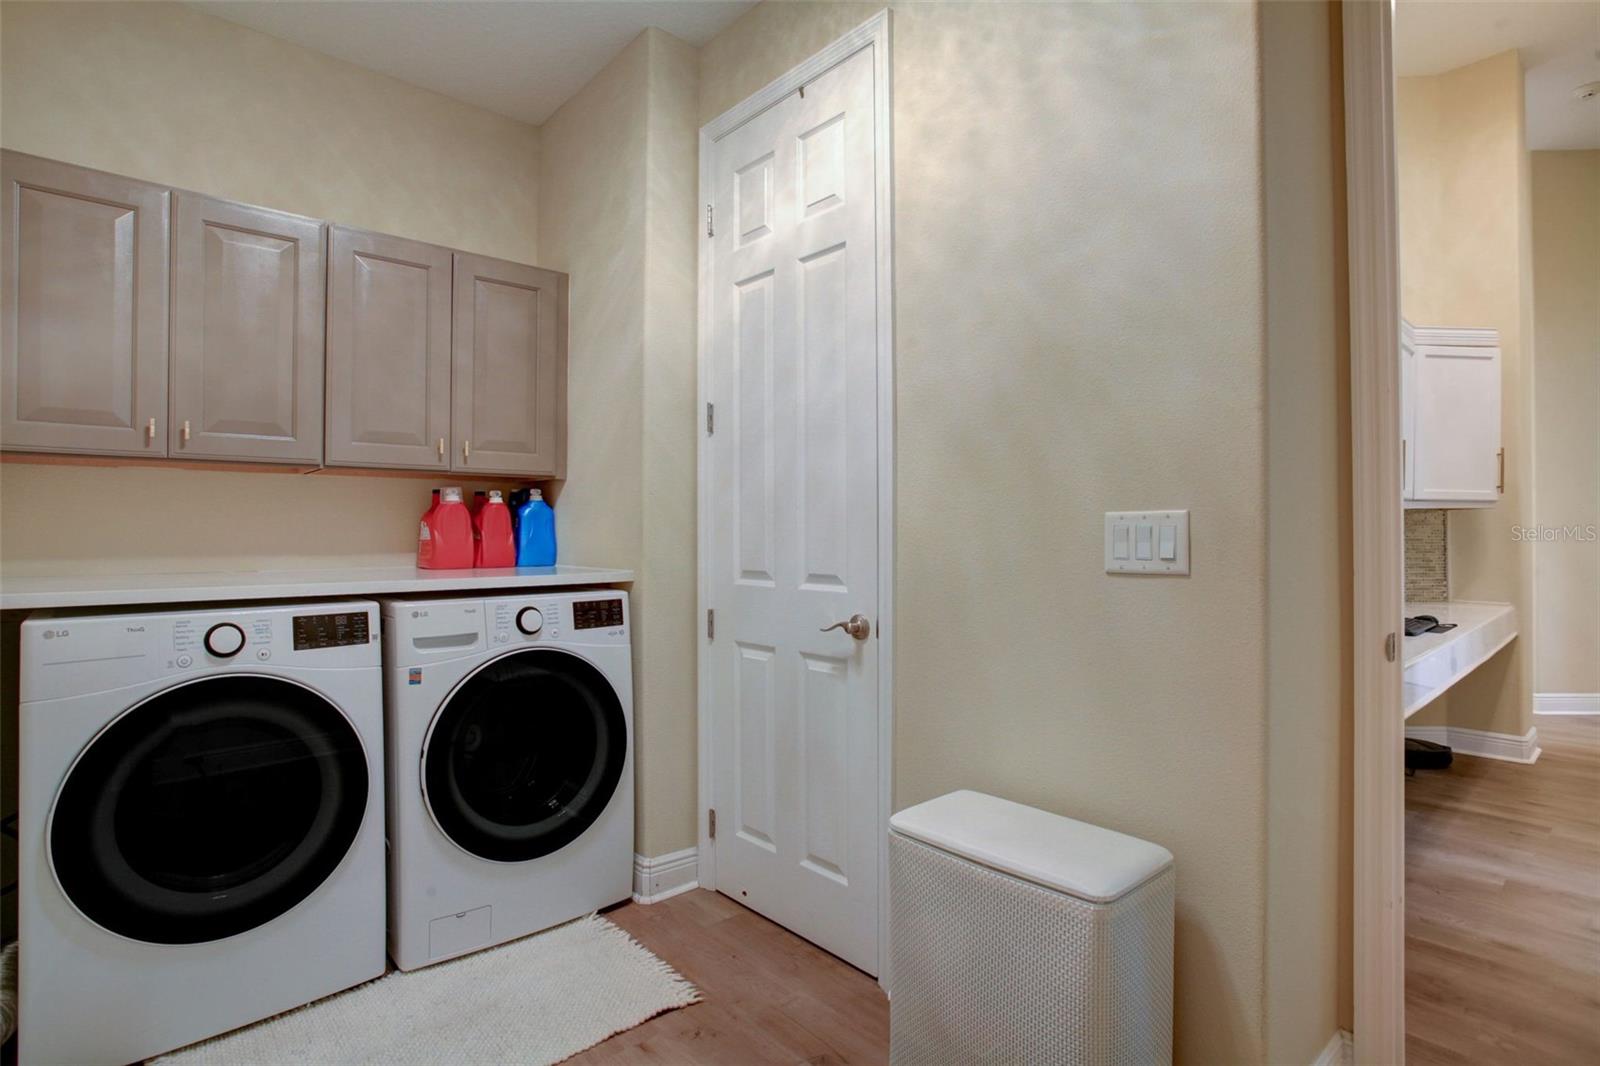 Laundry room on first floor